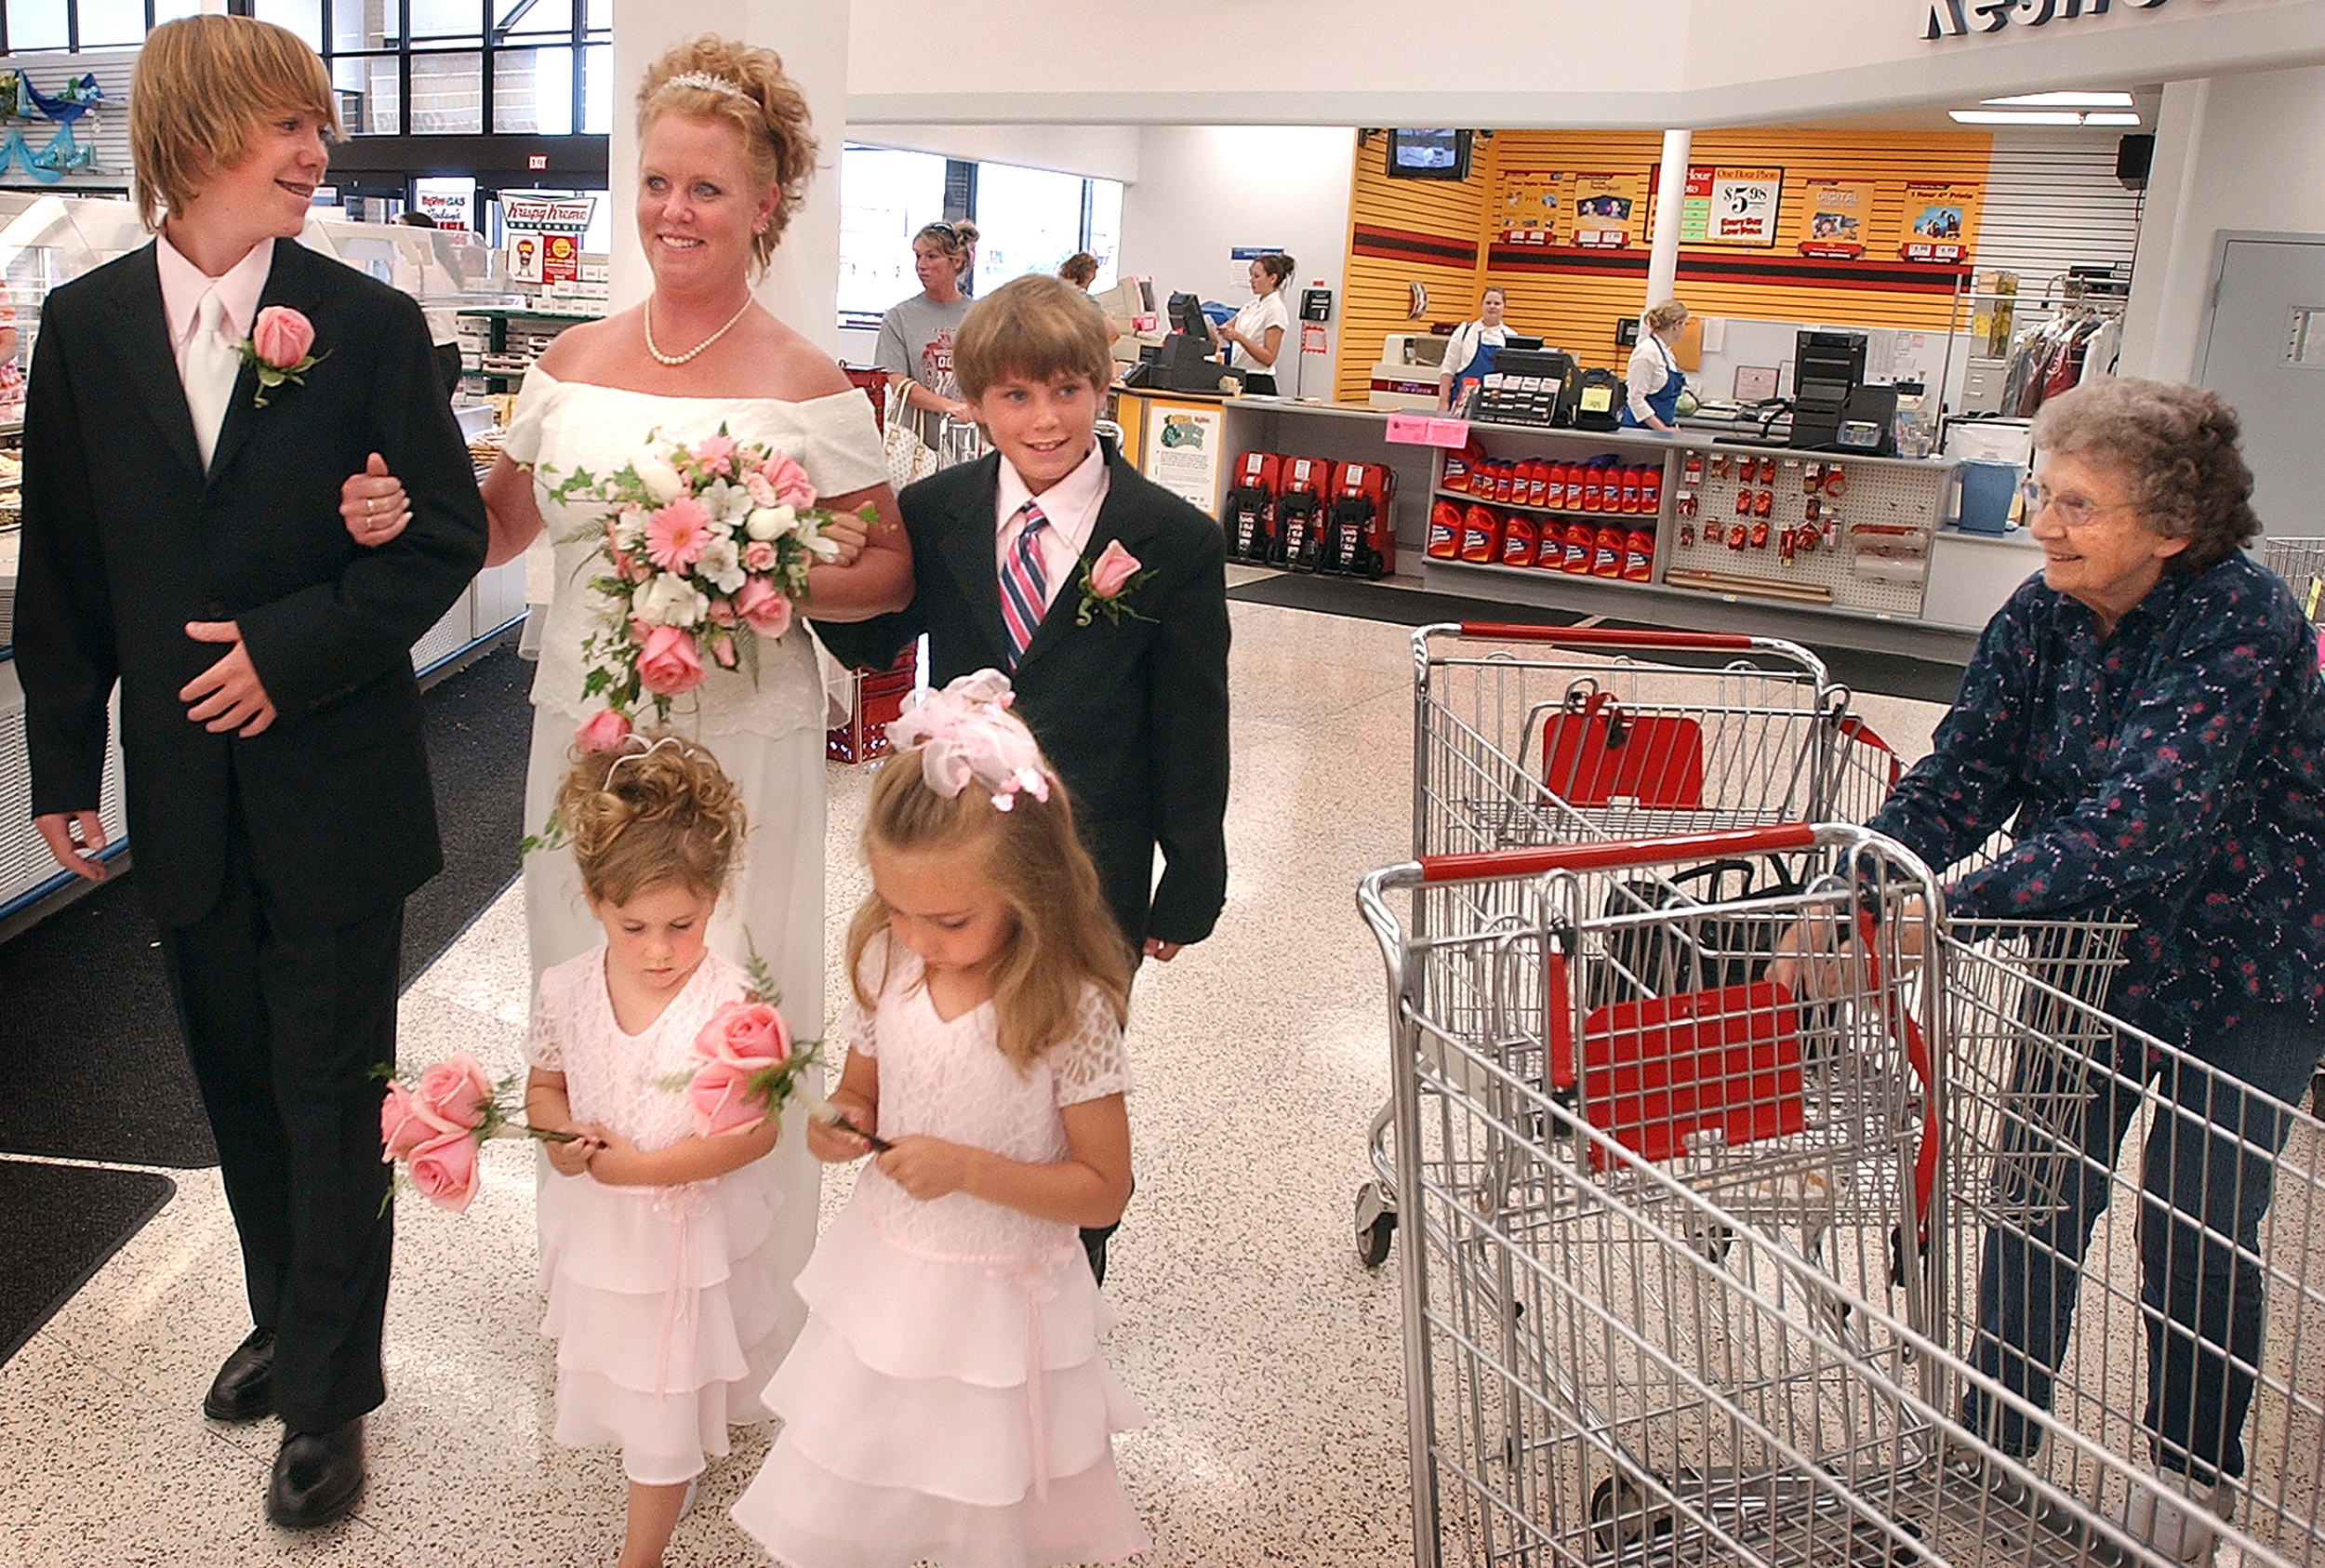  Diane Roderick drew a bit of attention on a Saturday at the HyVee grocery store in Quincy, Il. as she prepared to go down the aisle. Her sons Stuart Roderick, left, and Spencer Roderick, right, accompanied their mother and flower girls Morgan Fleer,